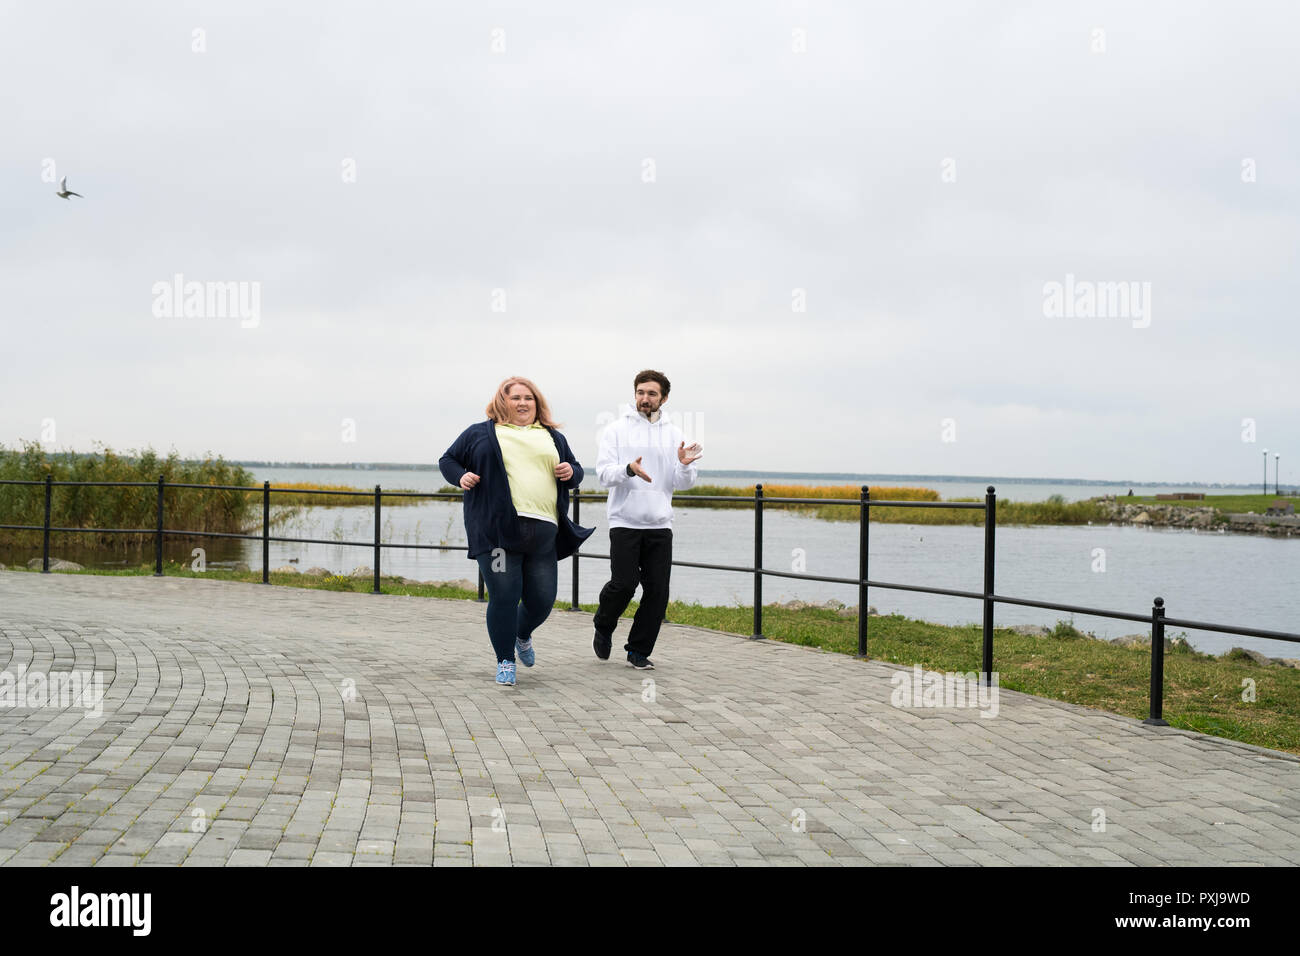 Obese Woman Running Outdoors Stock Photo